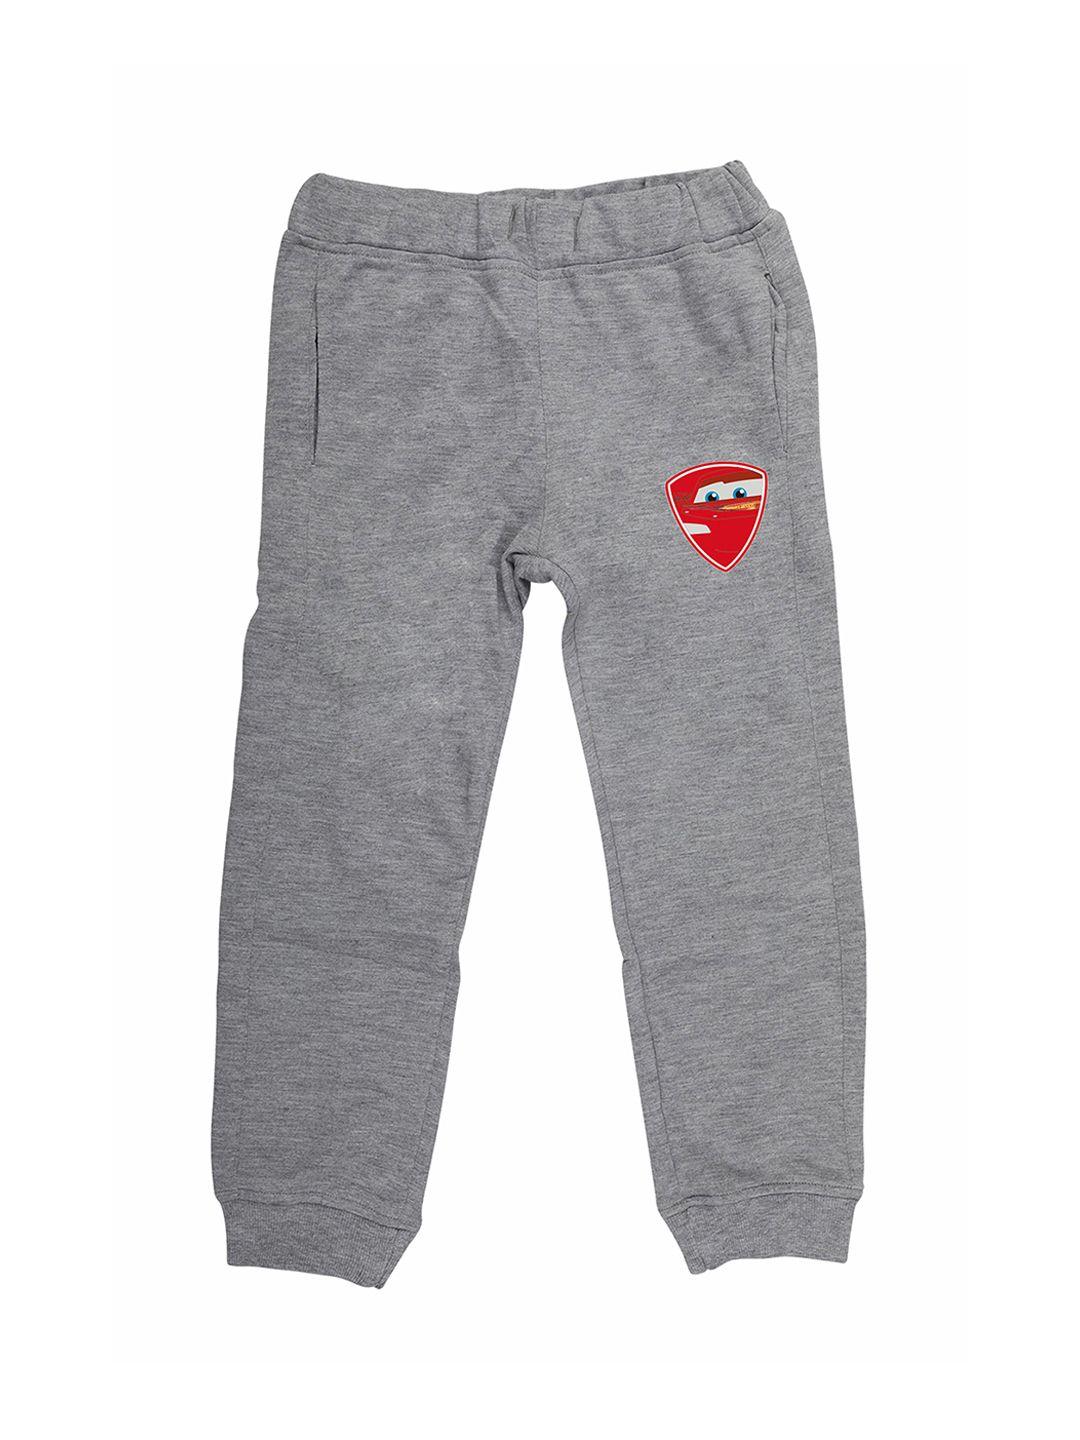 disney by wear your mind kids grey regular fit solid joggers